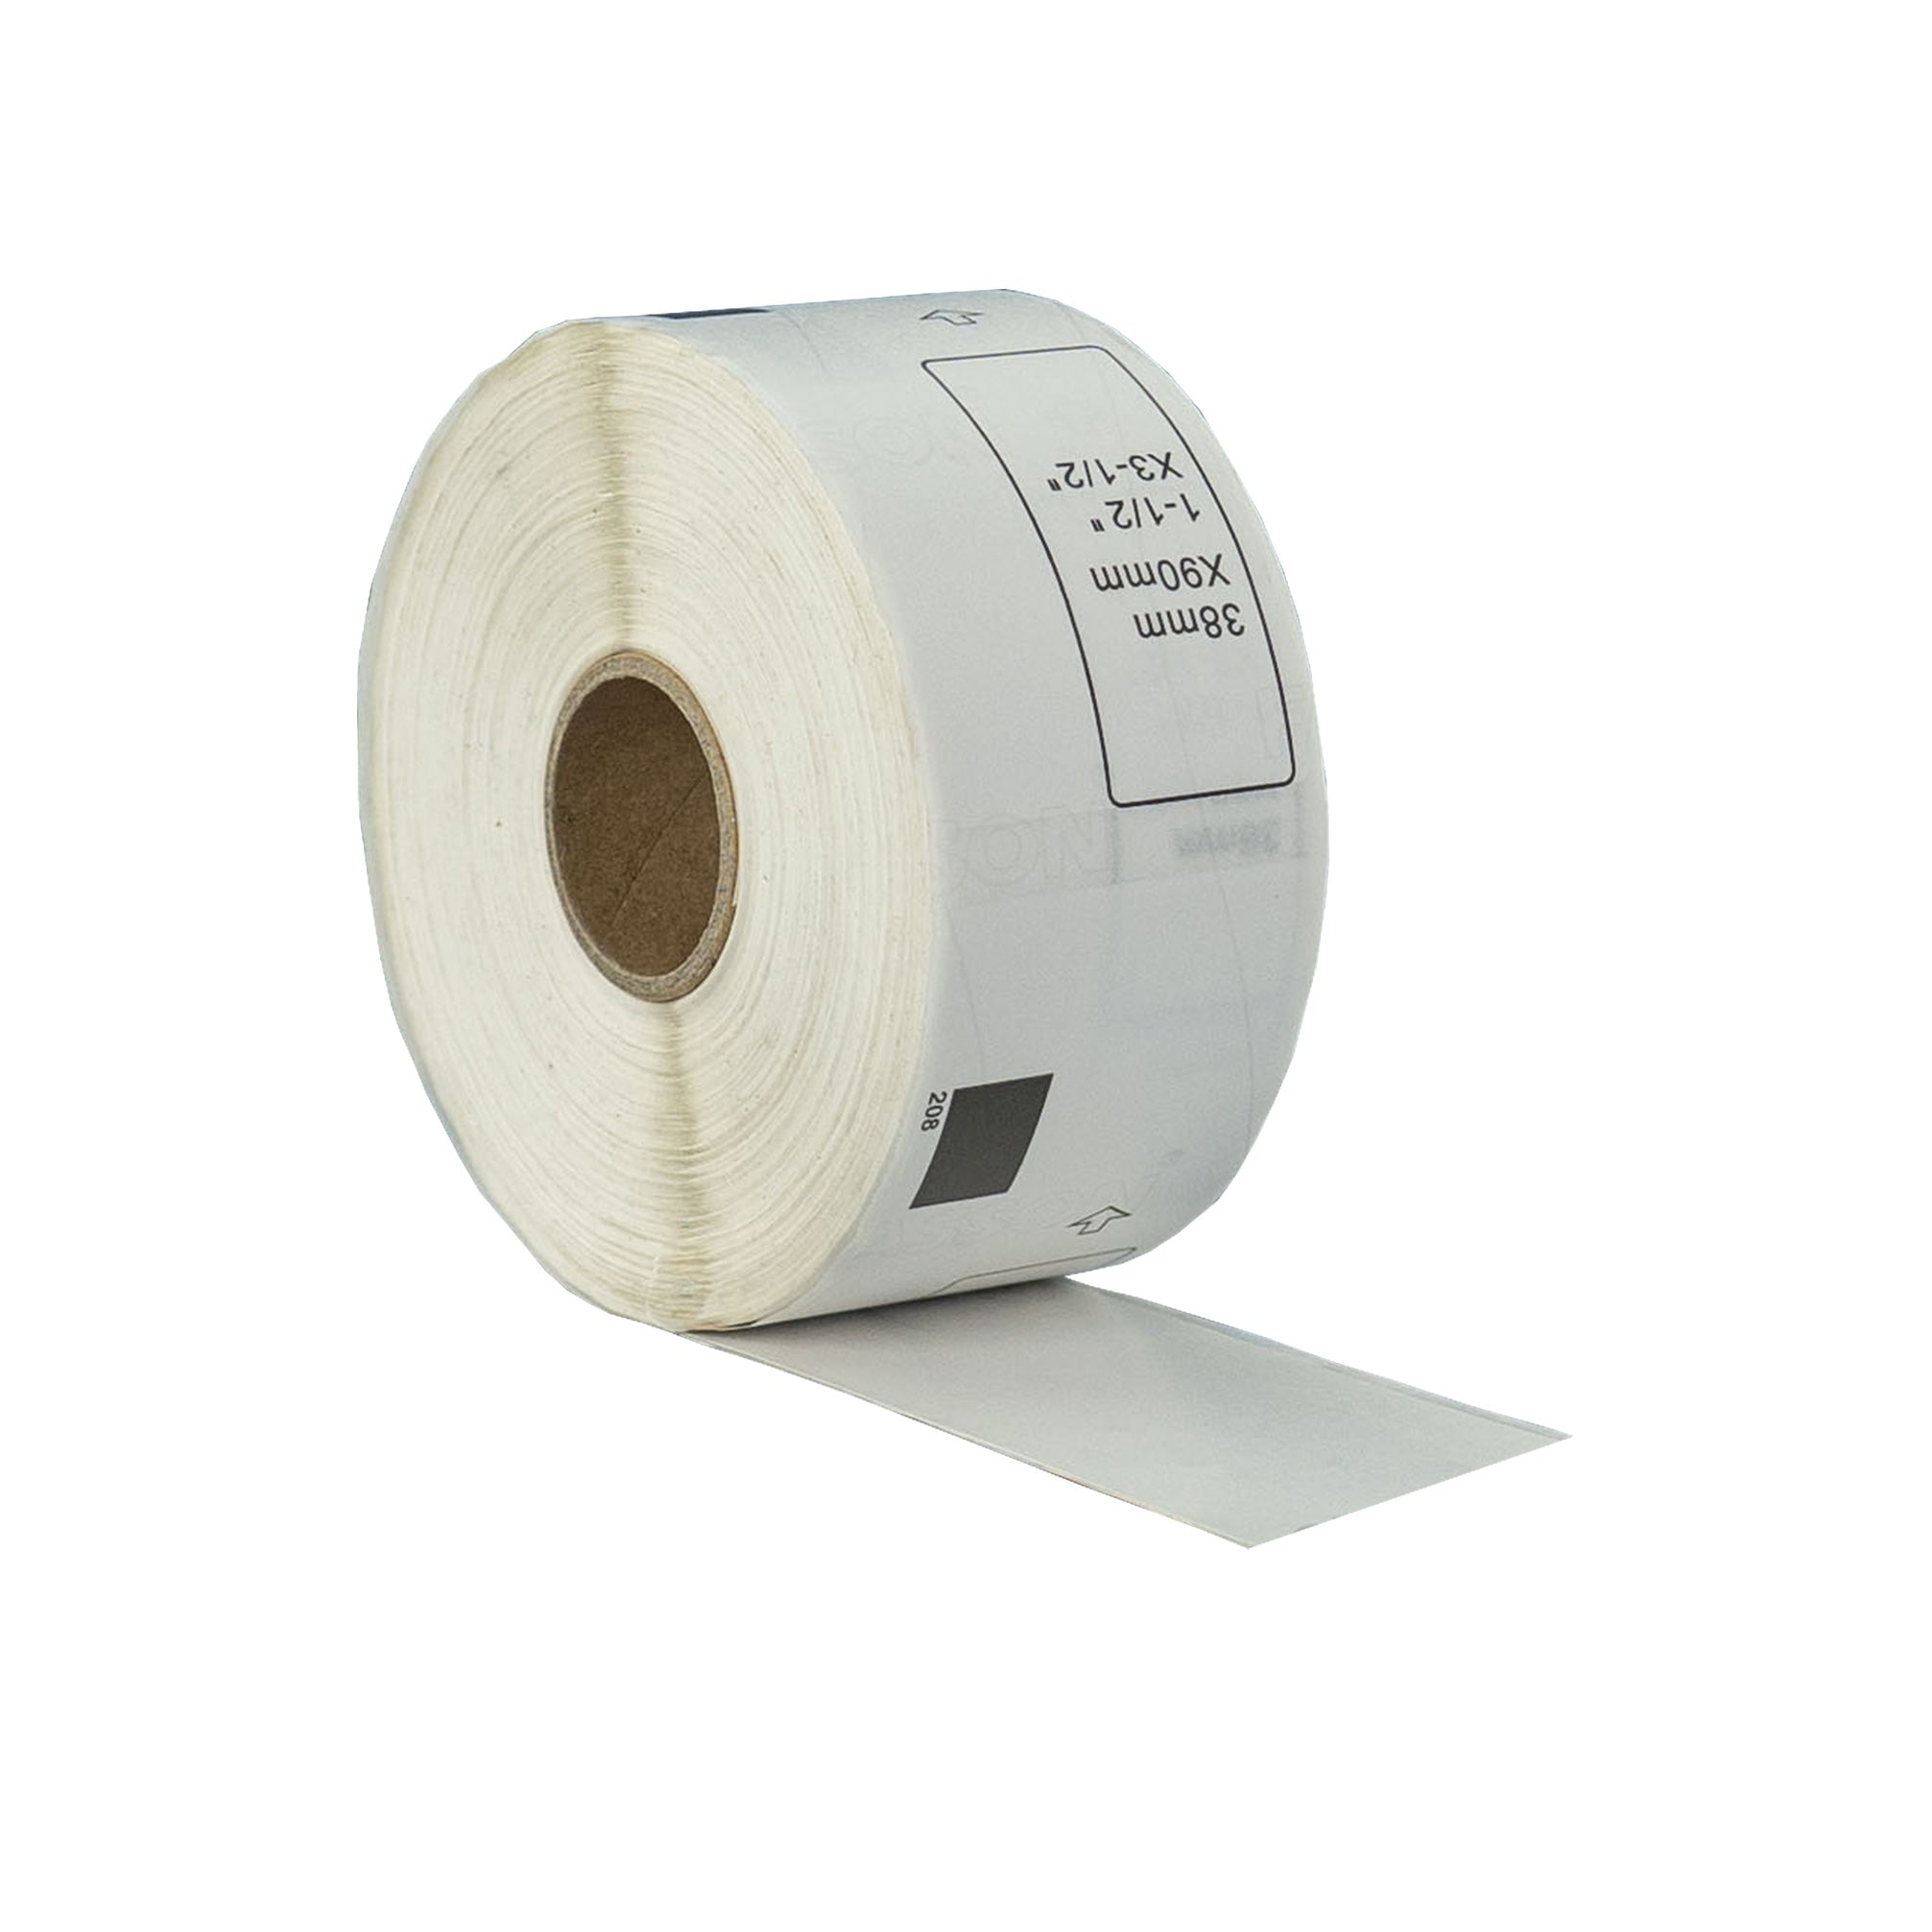 Compatible Brother DK-11208 Address Refill Labels 38 x 90mm/ 50 Rolls